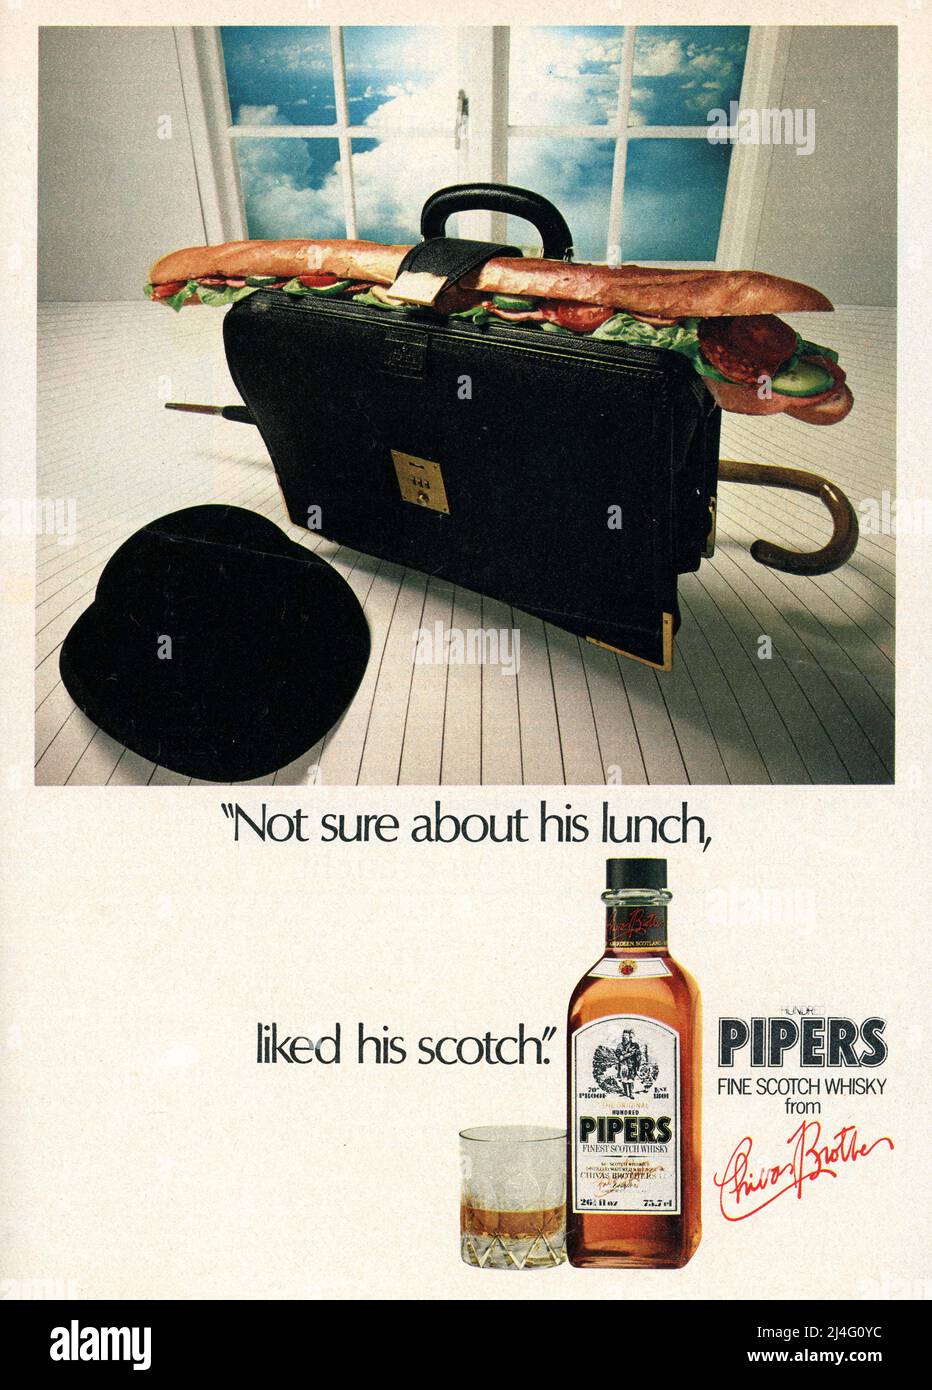 Magazine advert  for 100 Pipers Scotch Whisky, with a bowler hat and brief case it is clearly aimed at business men, bowler hats were worn by conservative city gentlemen until the 1990's. U.K. 27 May 1979 Stock Photo